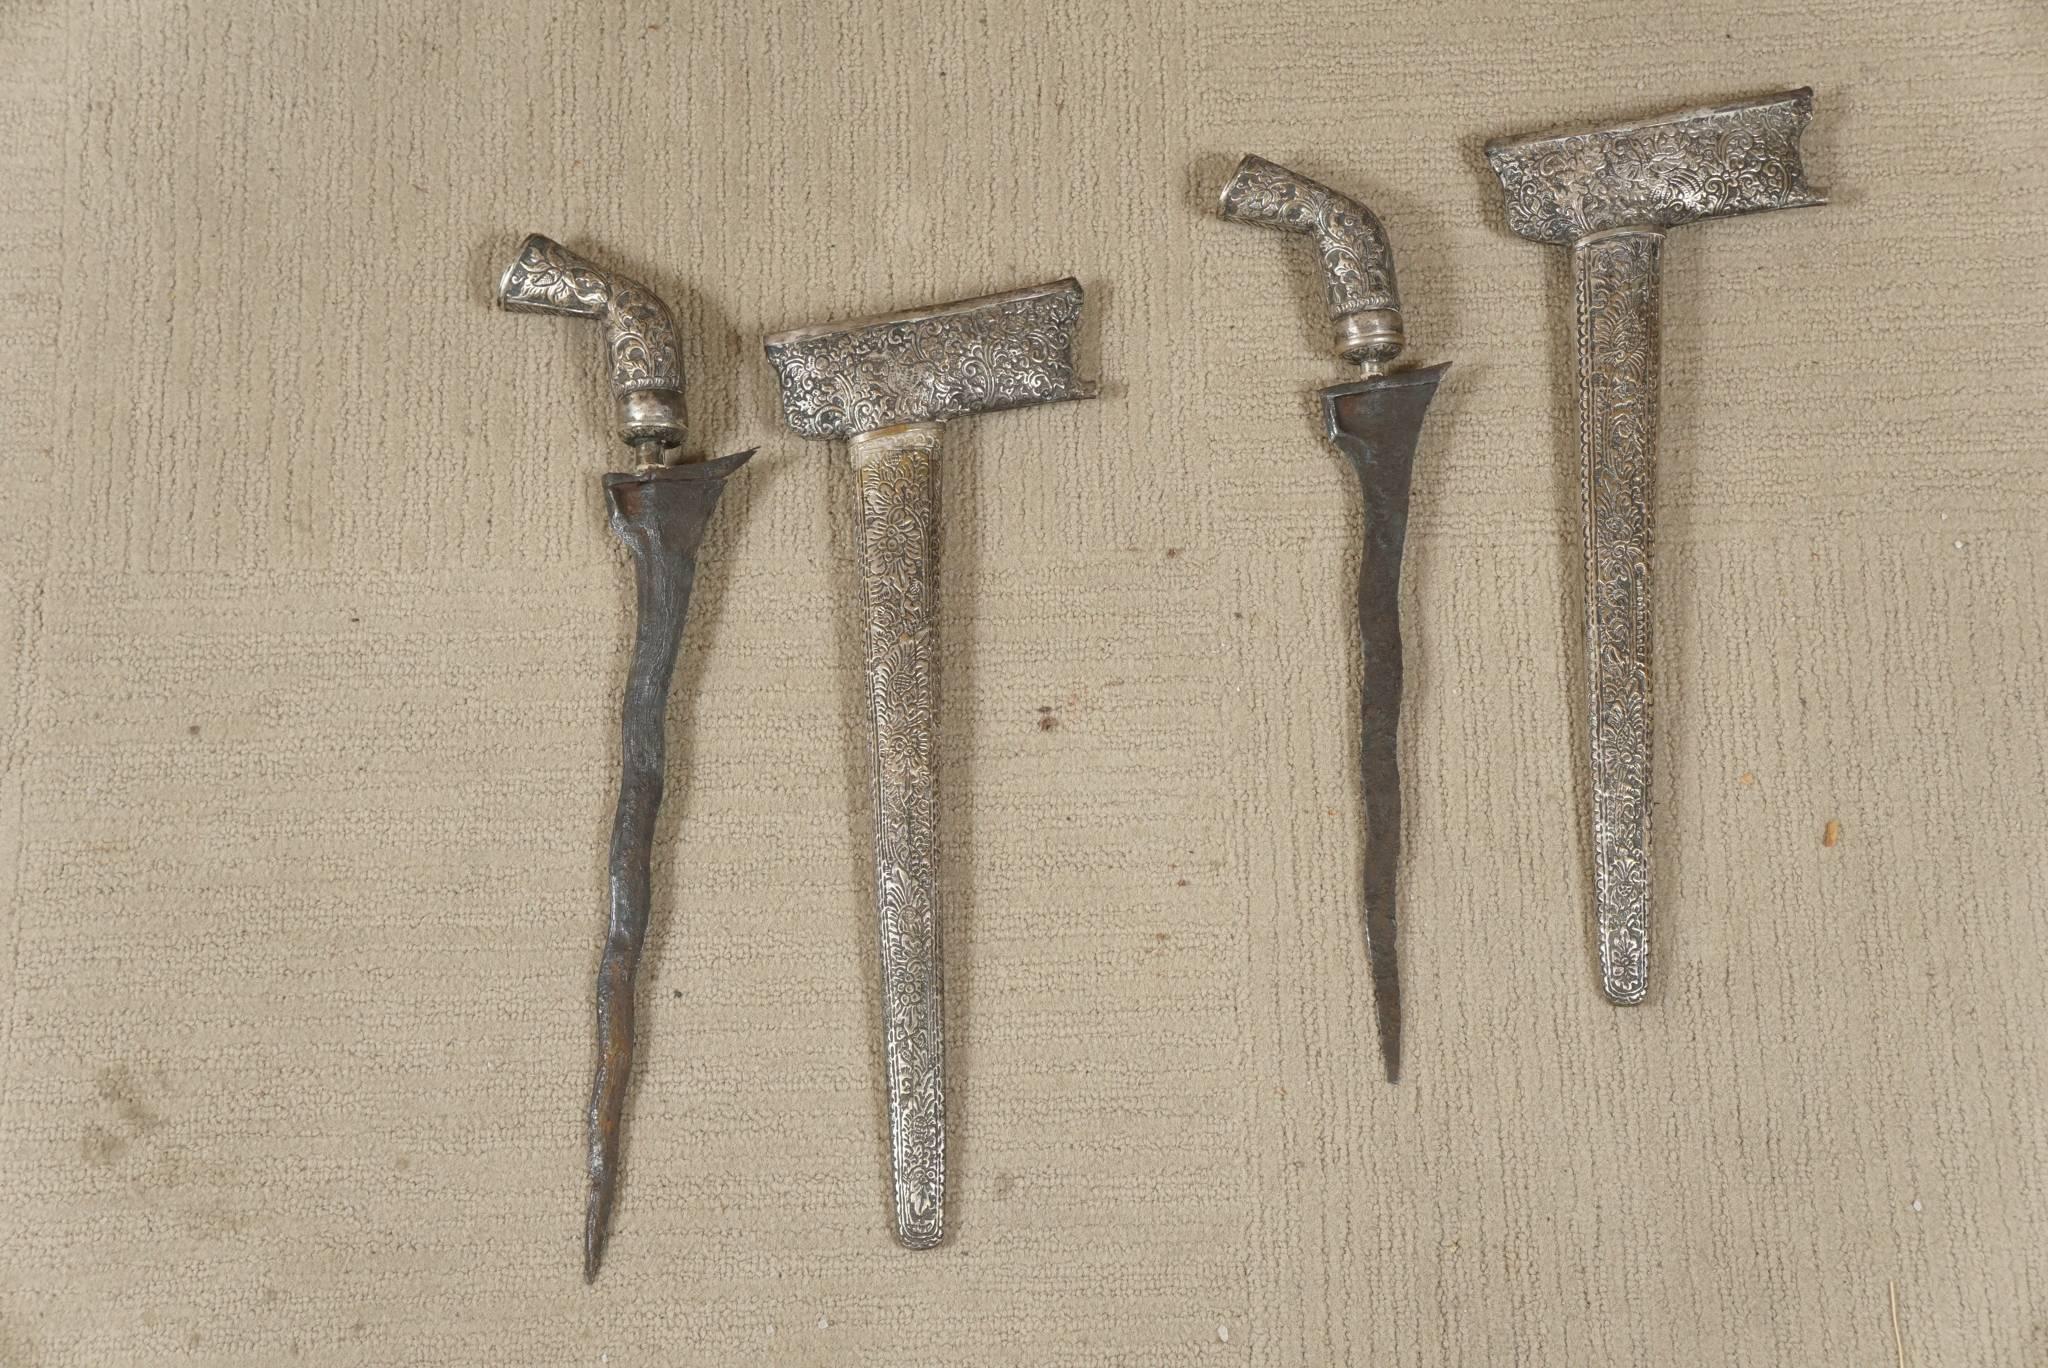 Pair of daggers from Malaysia - Keris Blades. With silver sheath. With silver handle.